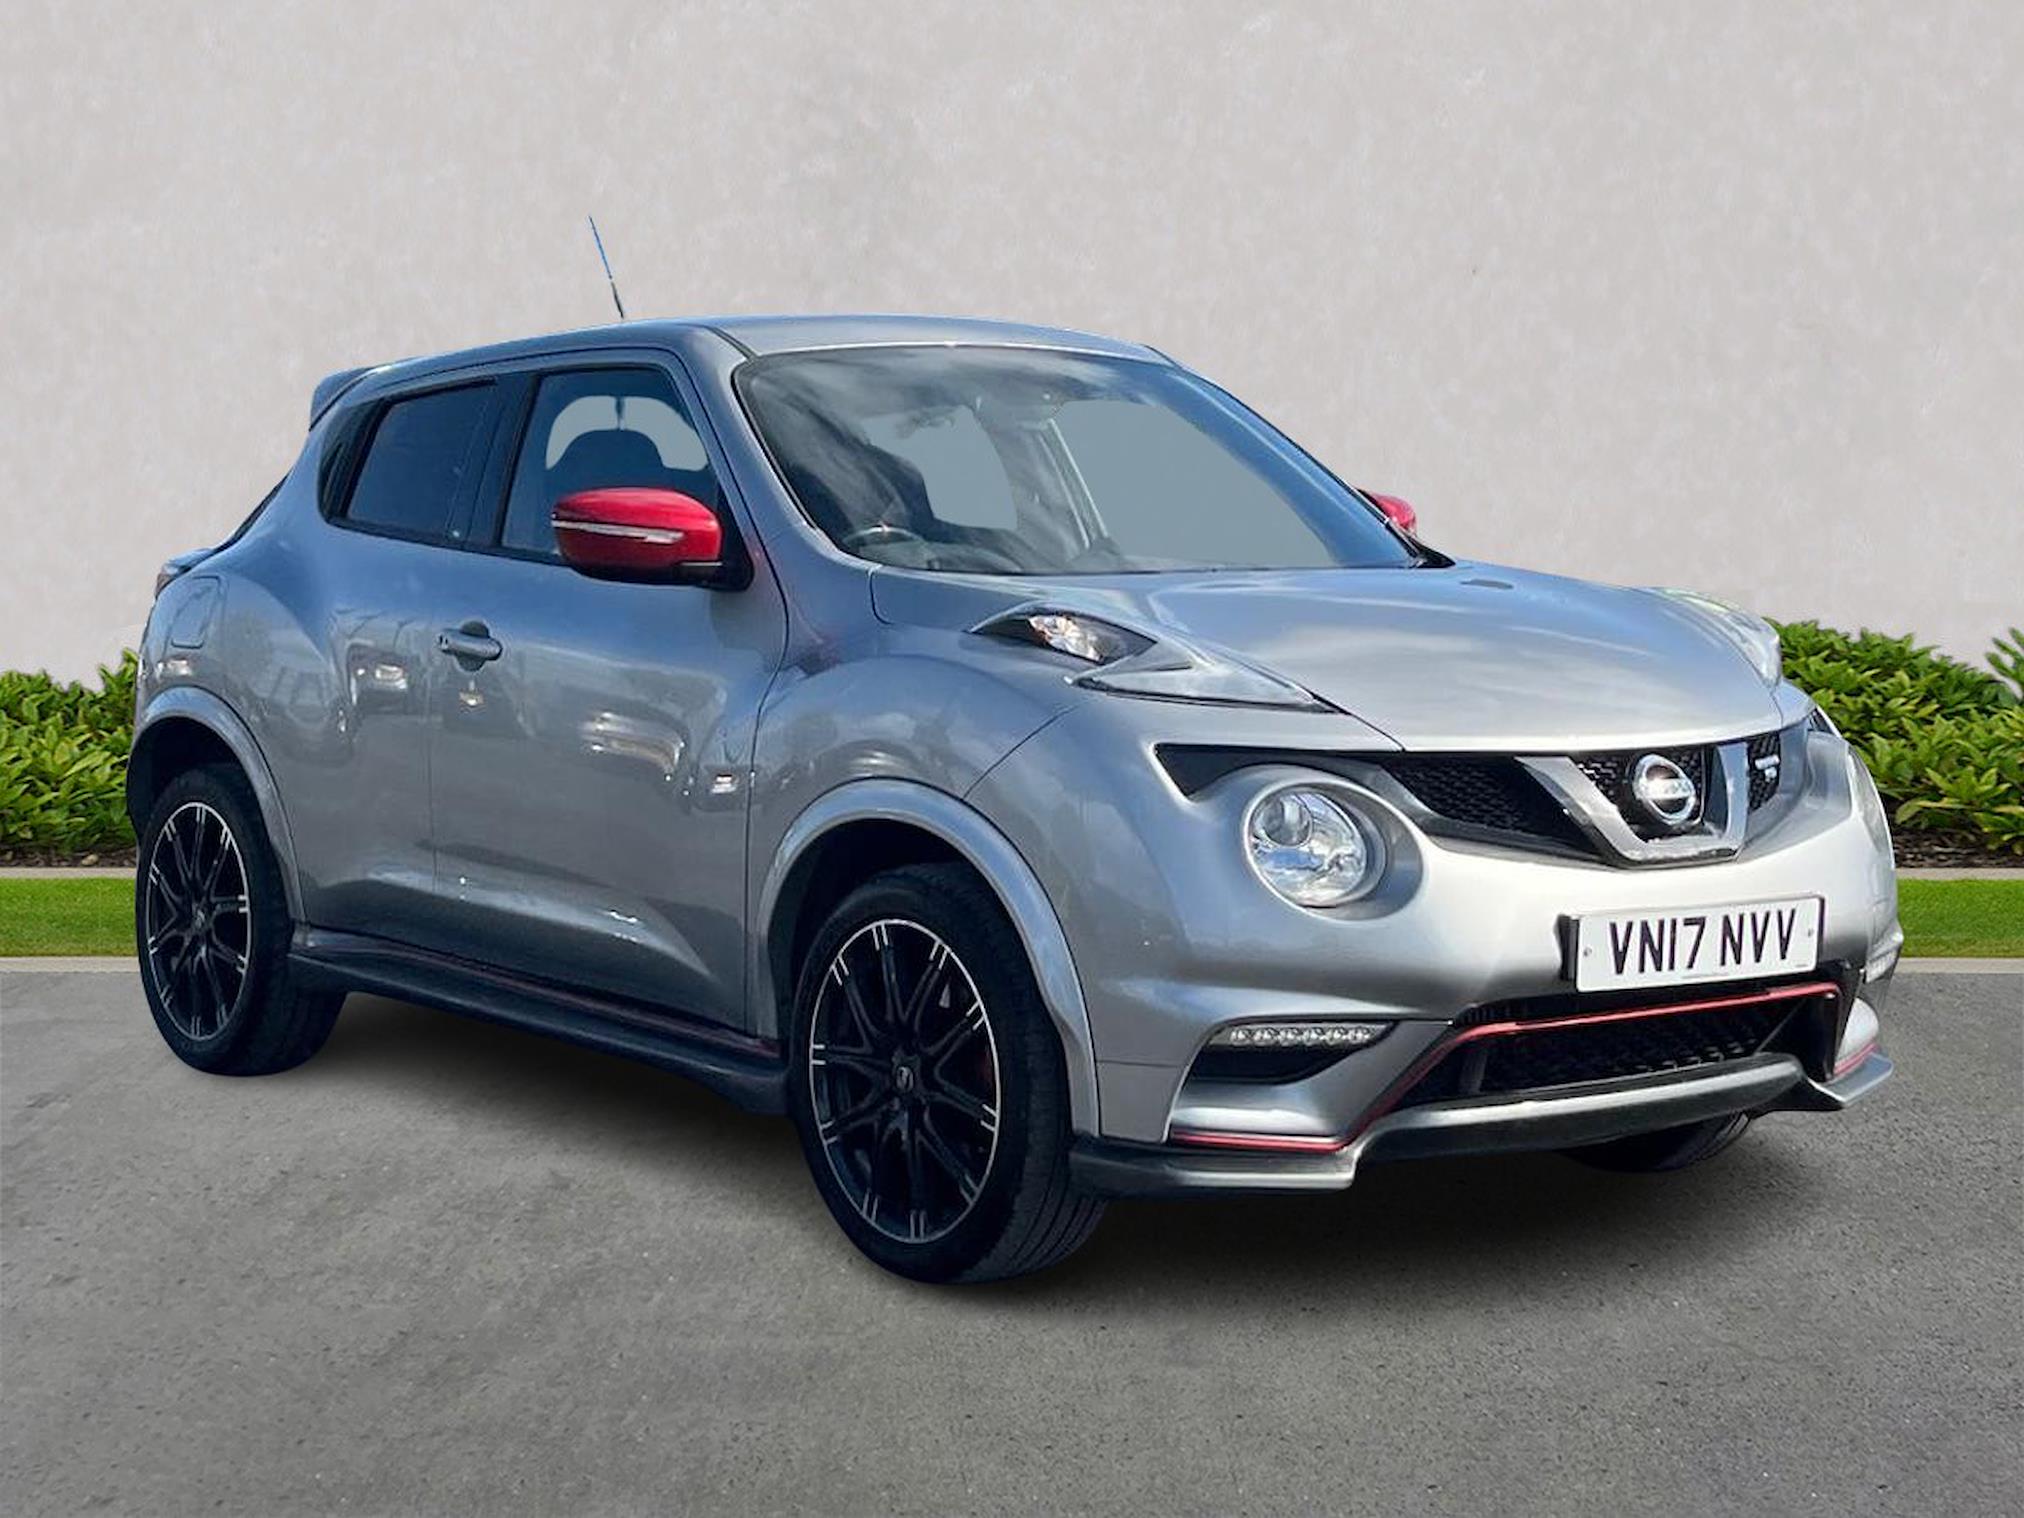 Used NISSAN JUKE 1.6 Dig-T Nismo Rs 5Dr 2017